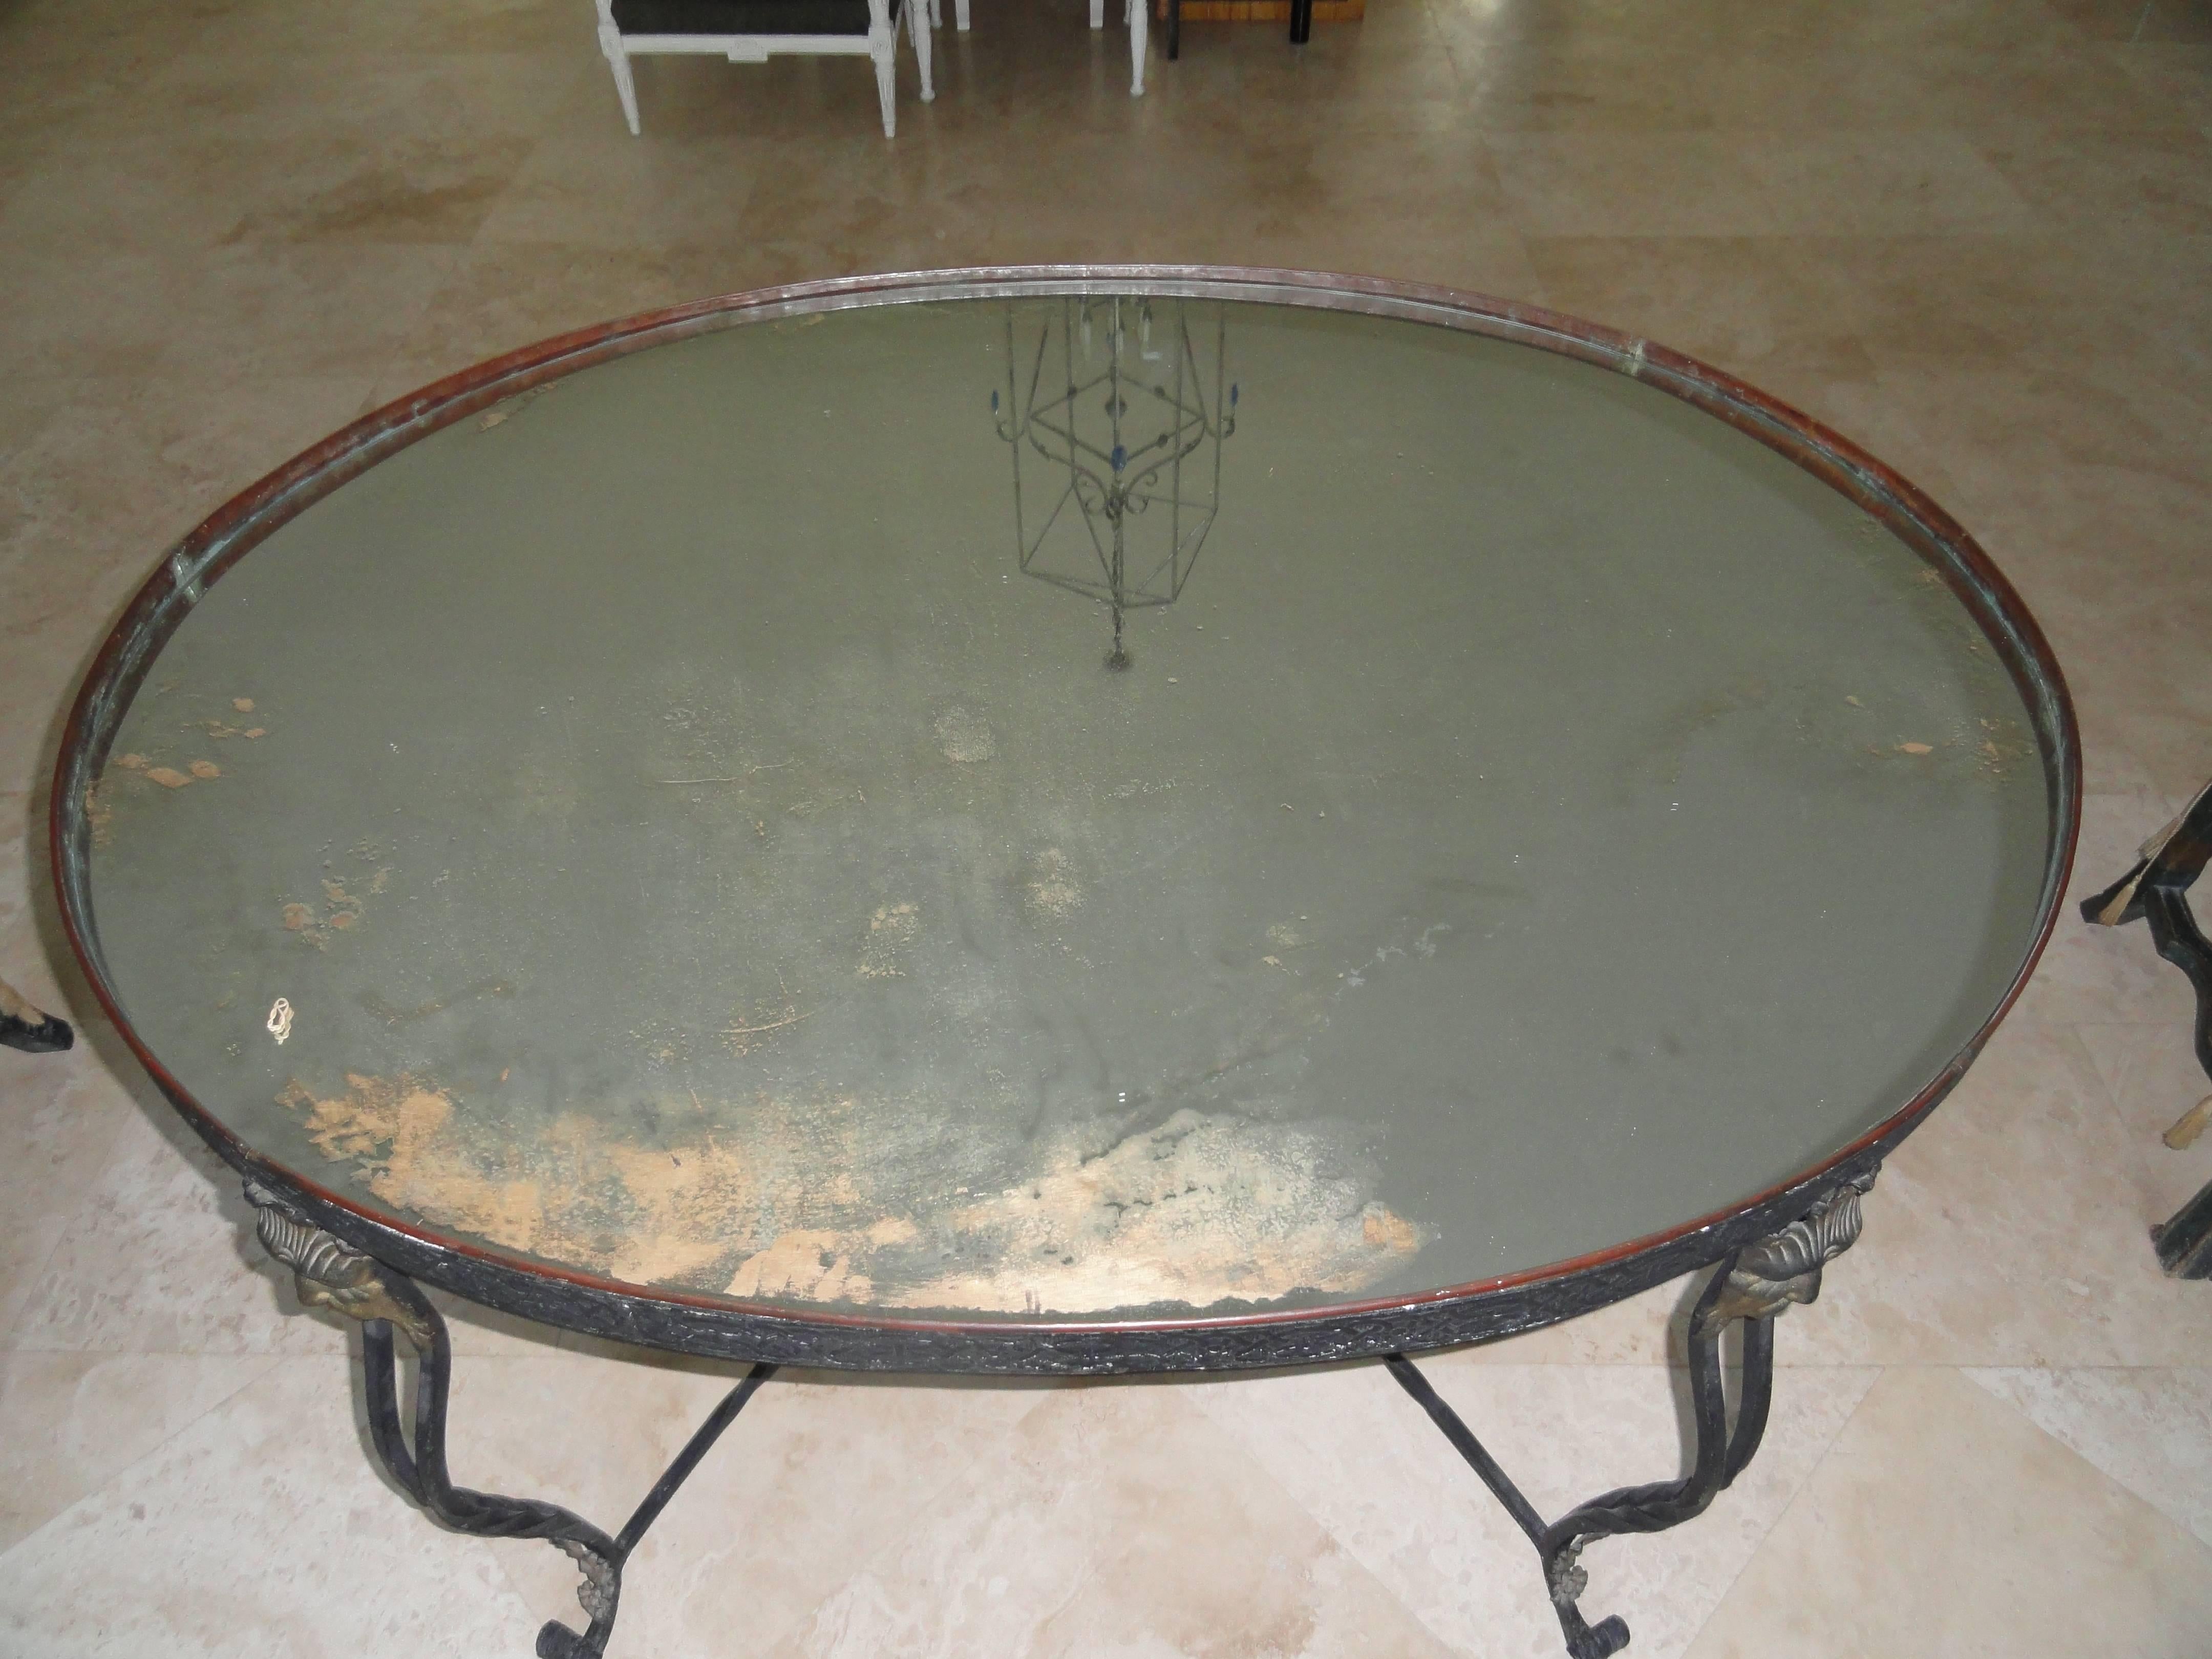 19th century French elliptical flower table or centre table with copper insert top. Four shaped metal legs terminating in metal masks. Shaped stretcher. Intricate apron detail. Inserted copper tray top with newer mirrored insert.
A stunning example